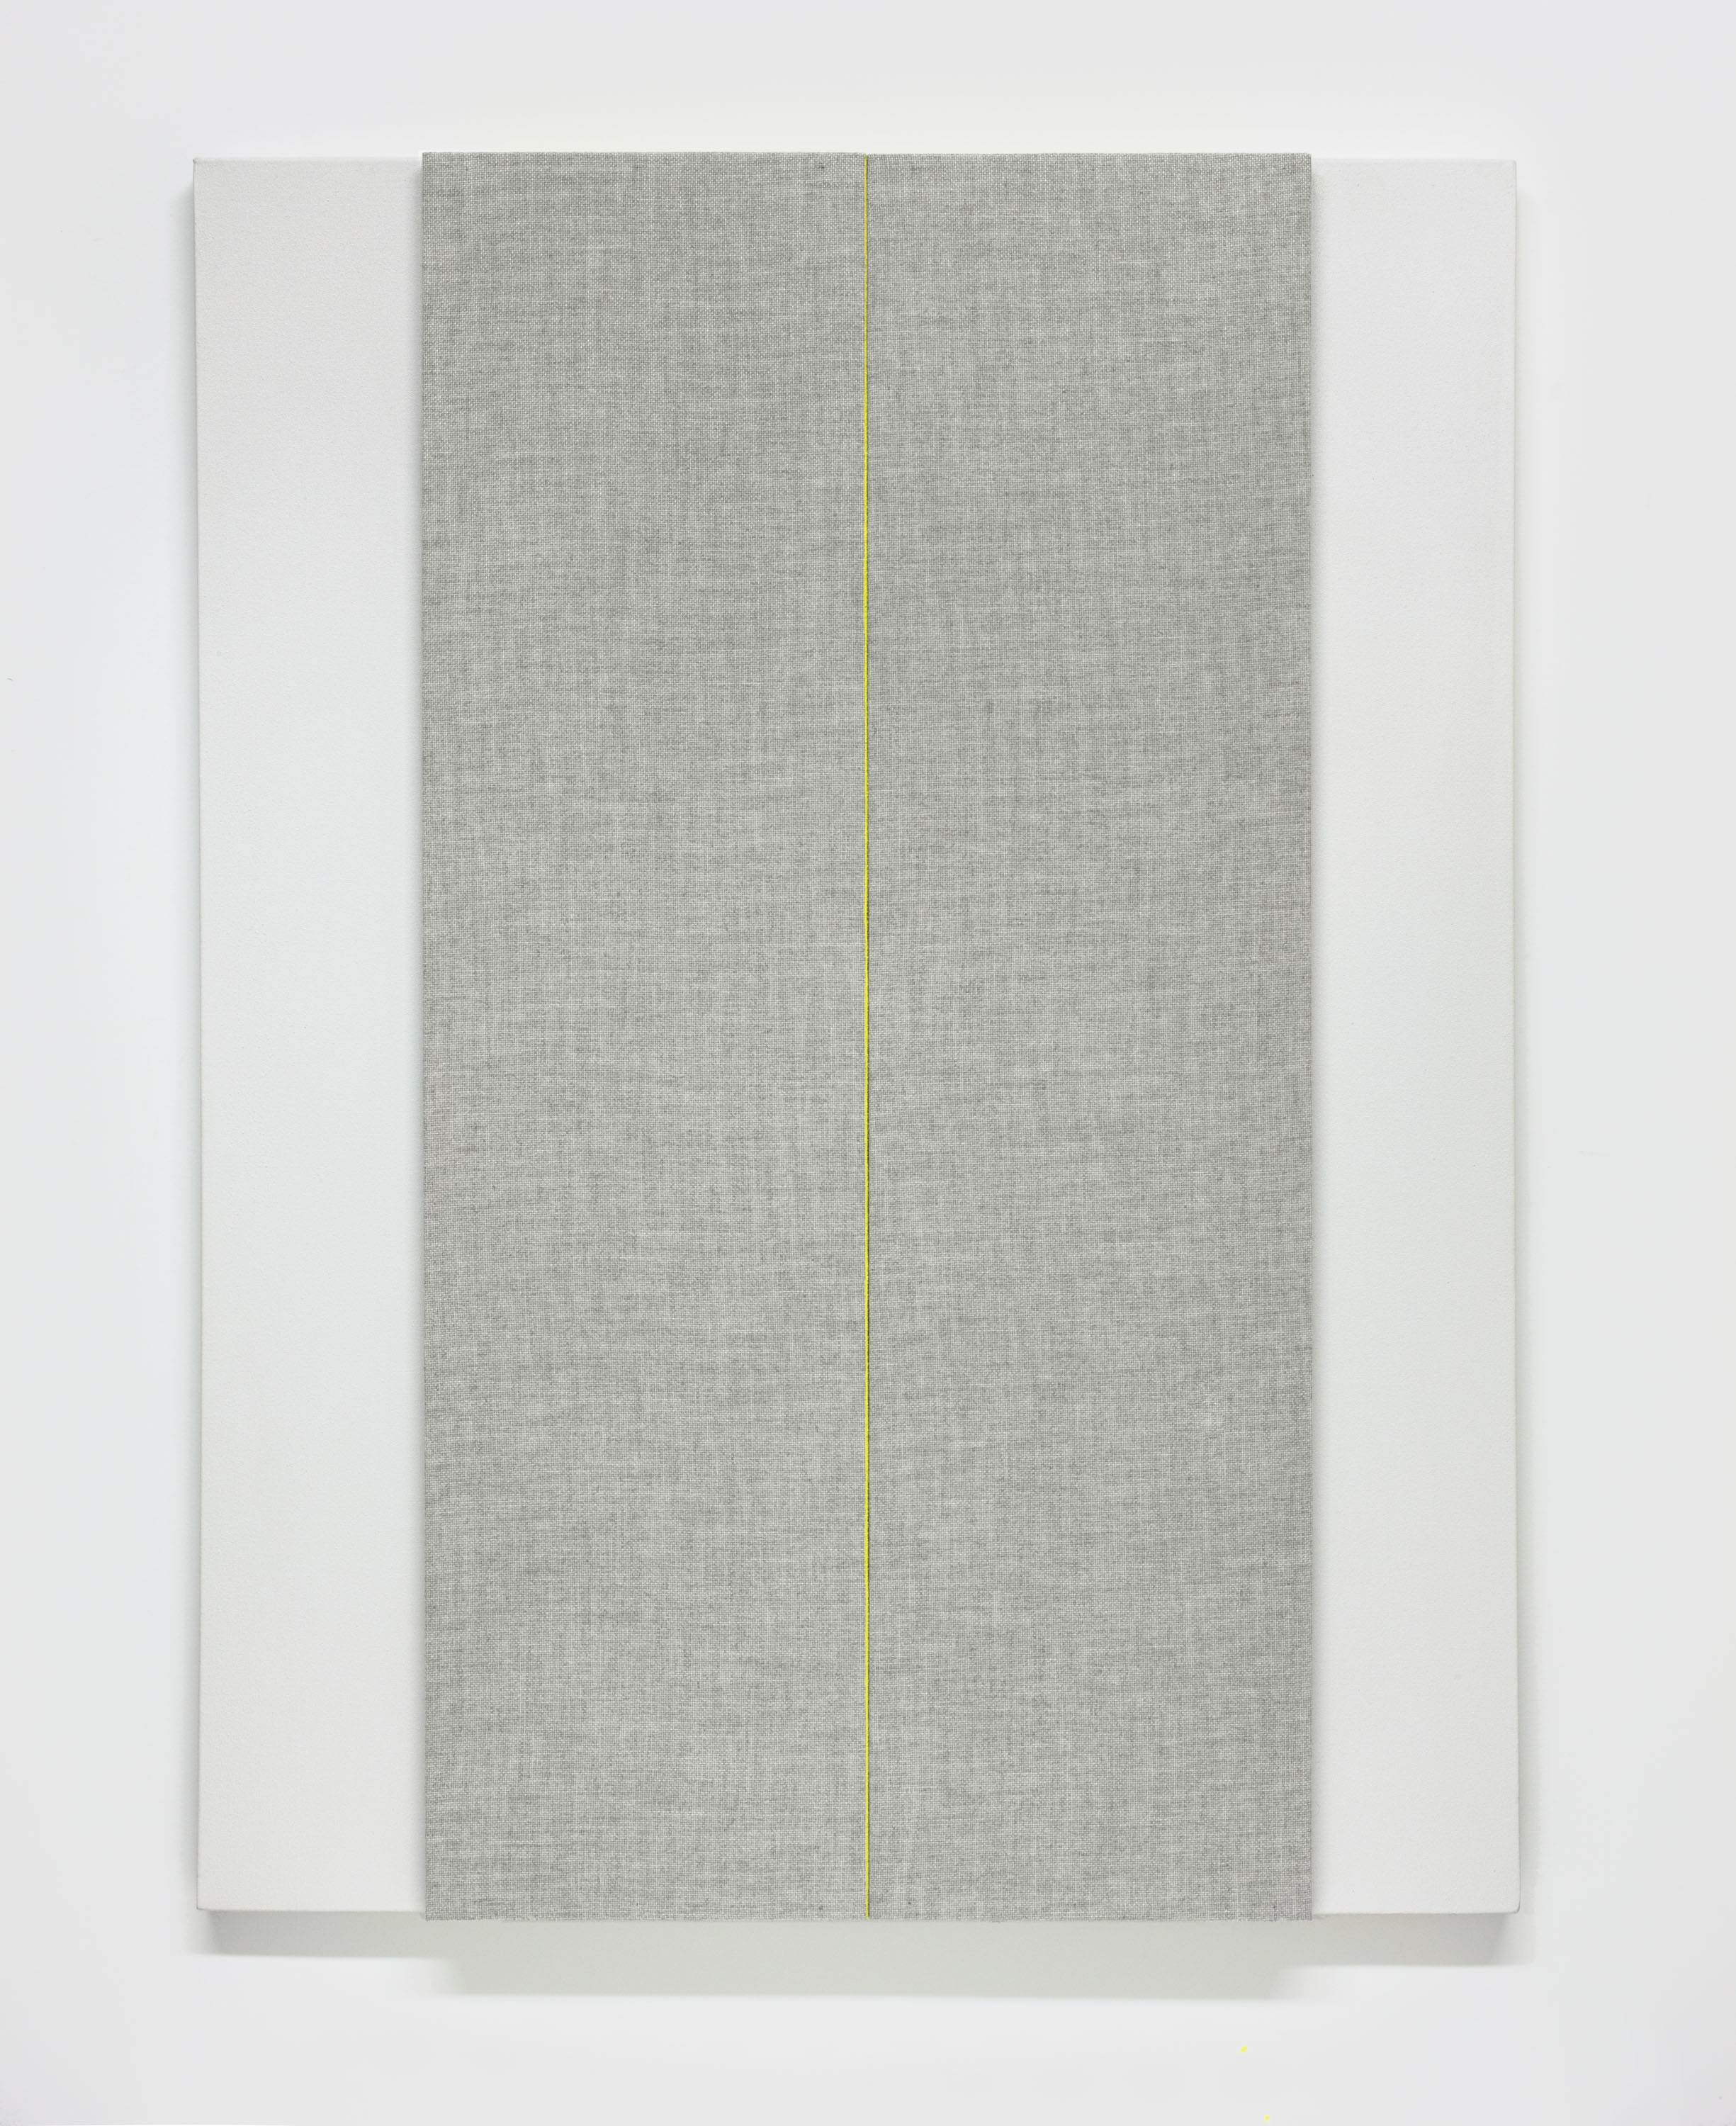  Light Gray with Middle C (variation #2)--&nbsp;Acoustic absorber panel and acrylic paint on canvas, 36 x 48 inches, 2013. 